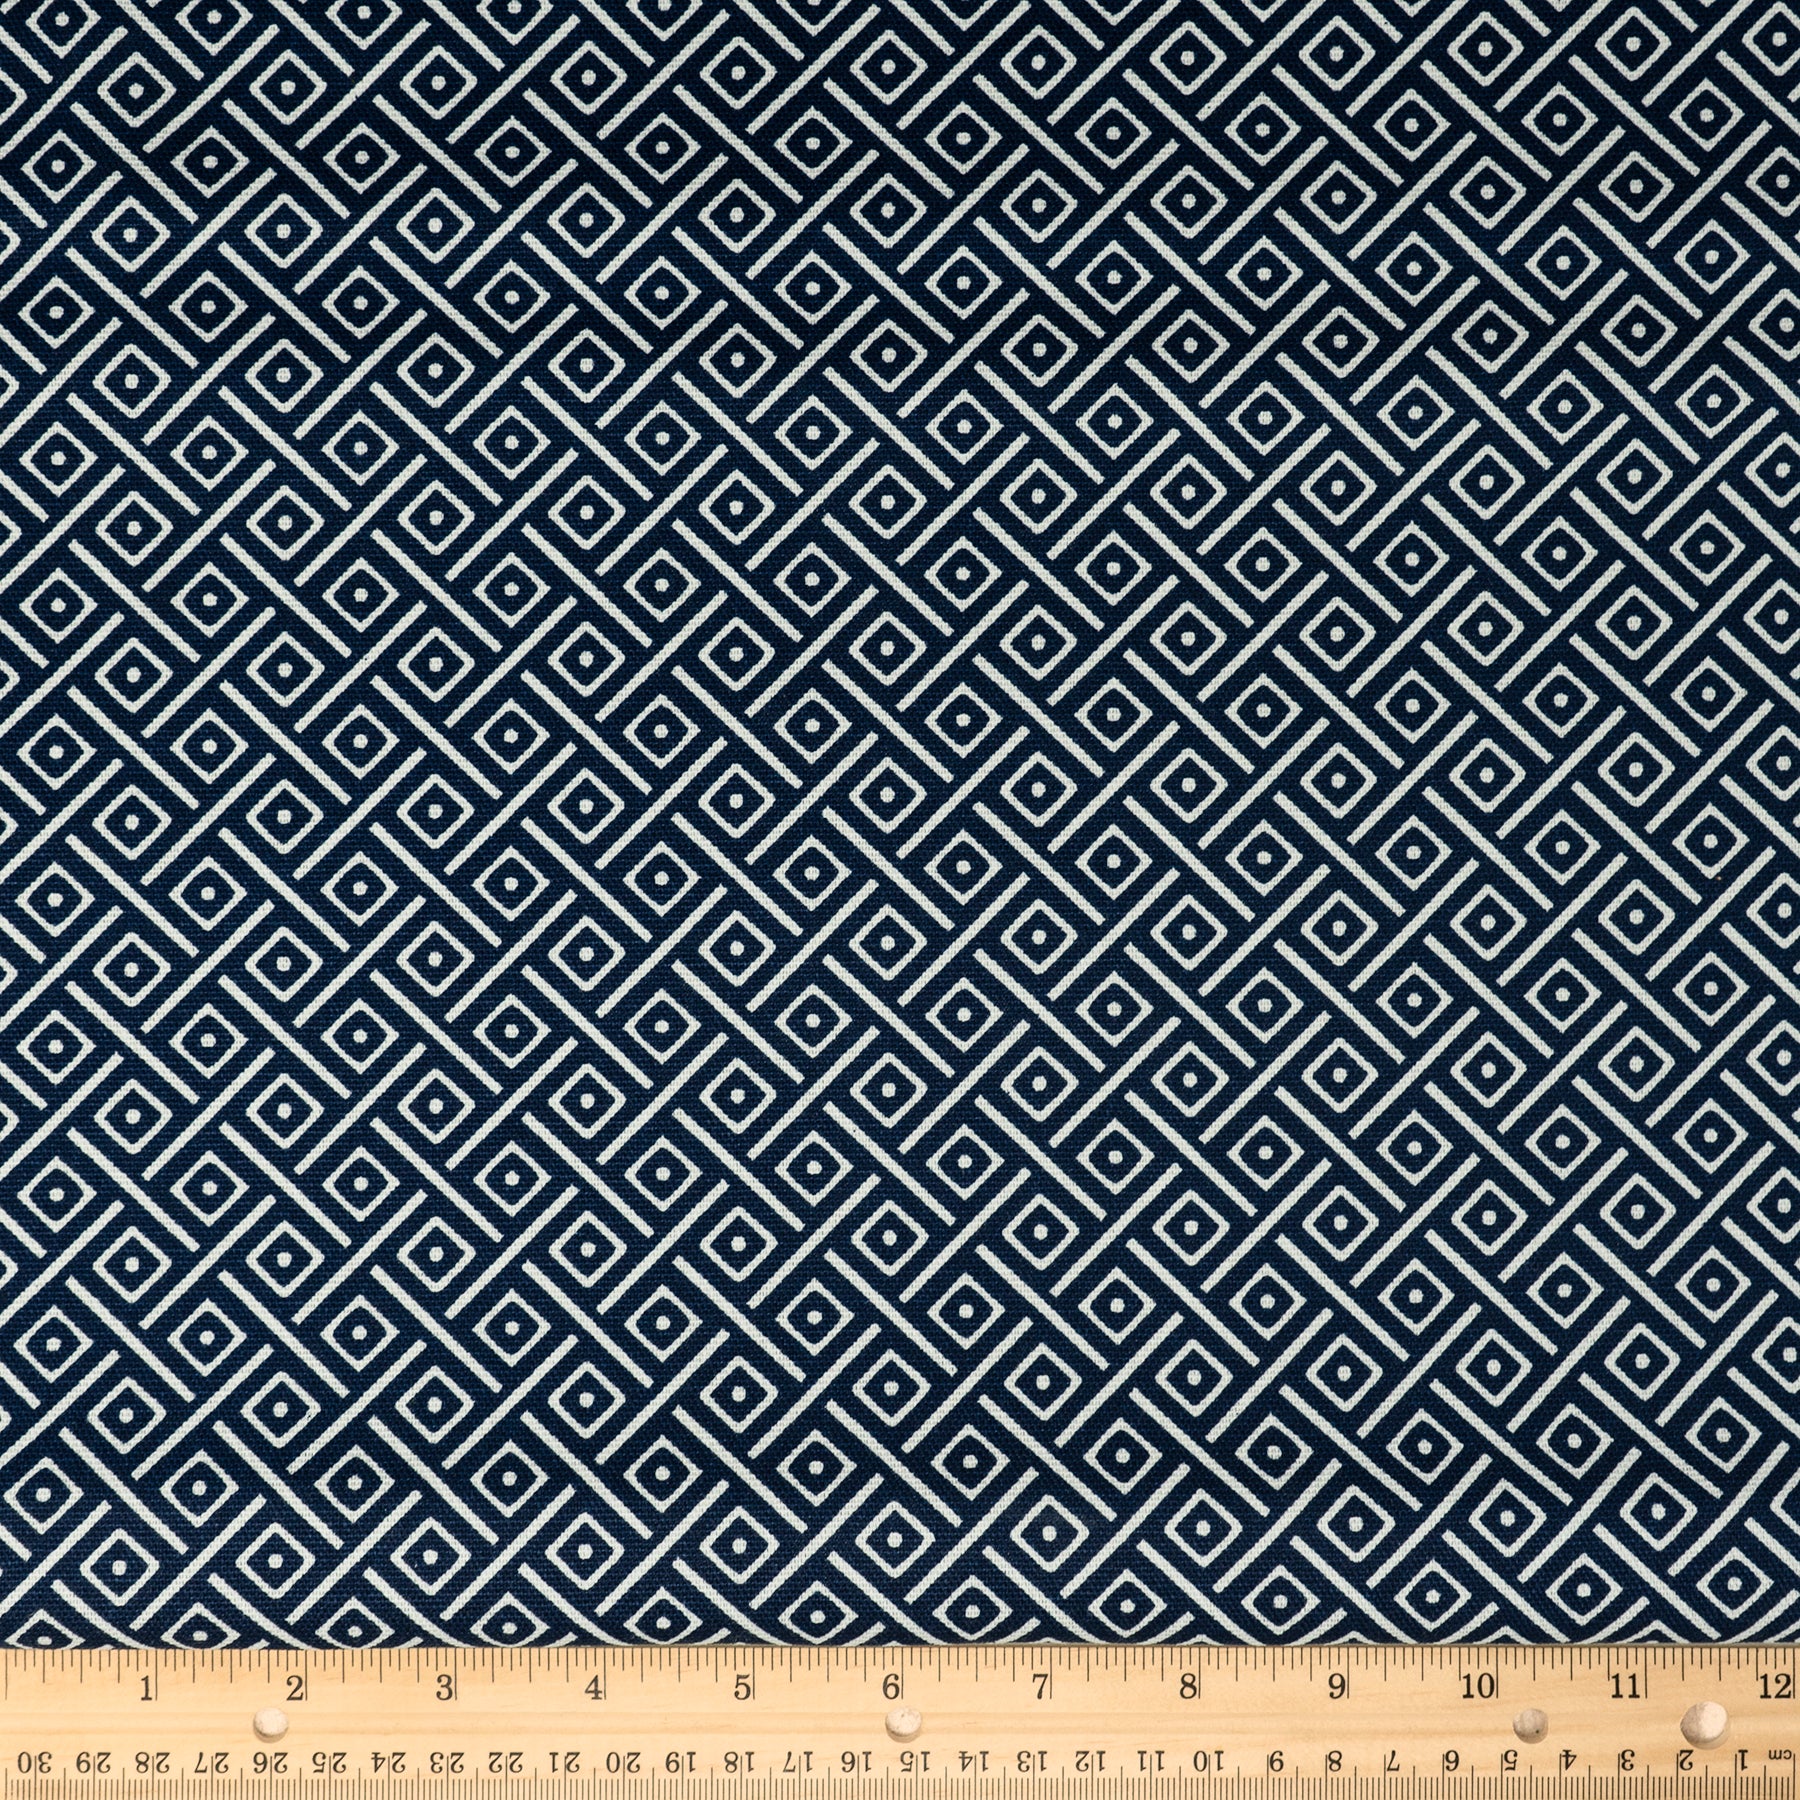 Waverly Inspirations Cotton Duck 45" Diagnal Weave Navy Color Sewing Fabric by the Yard